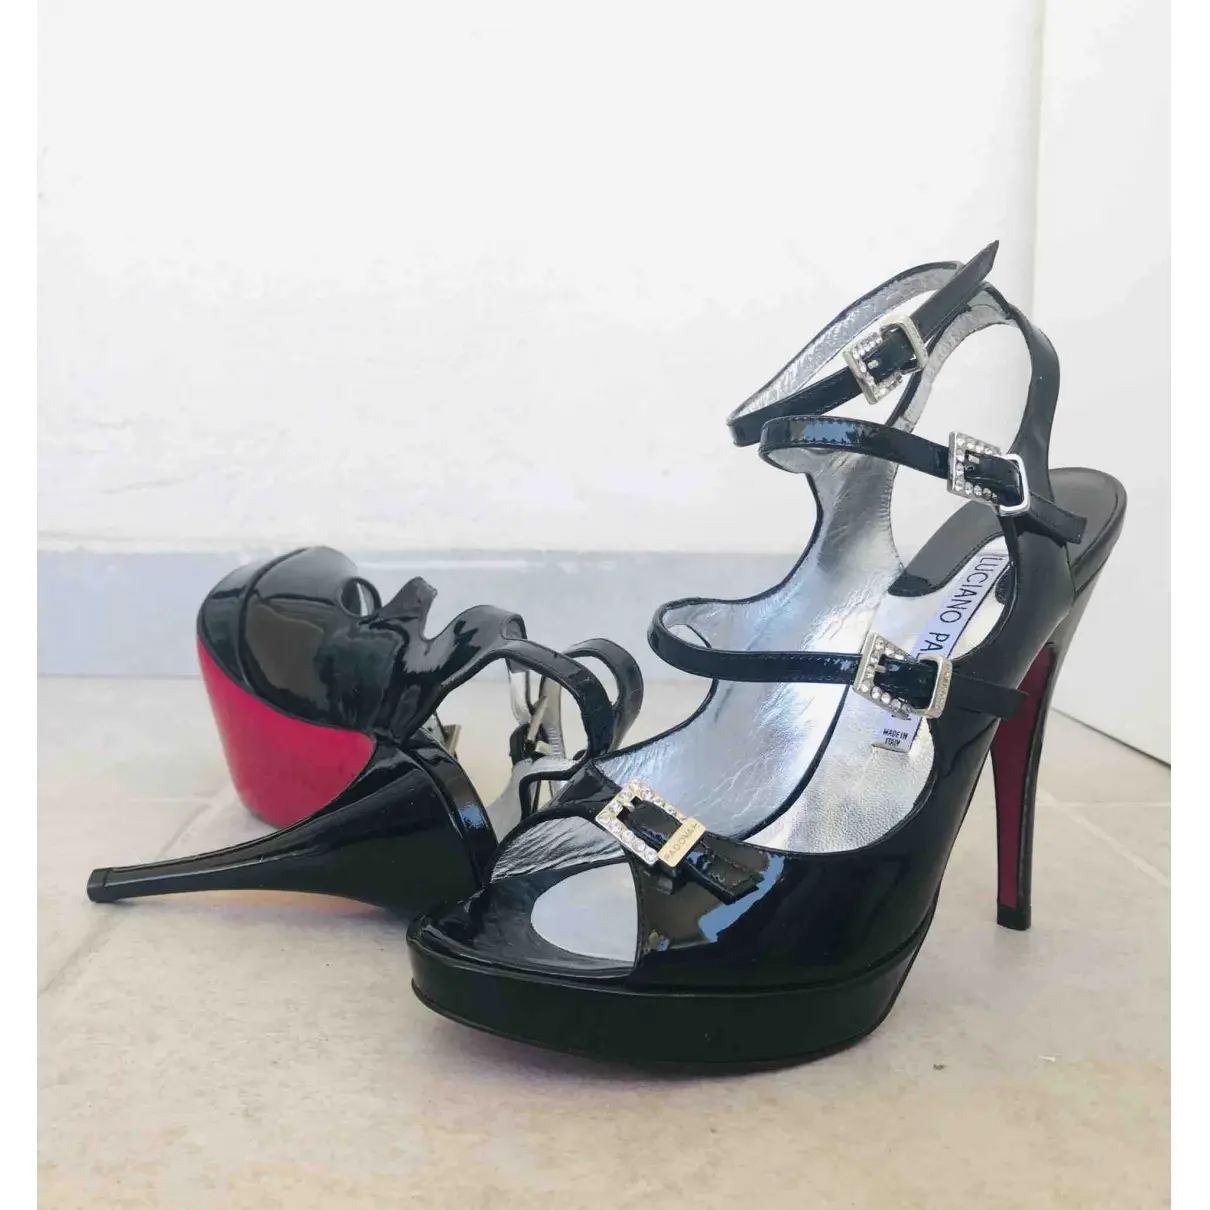 Buy Luciano Padovan Patent leather sandals online